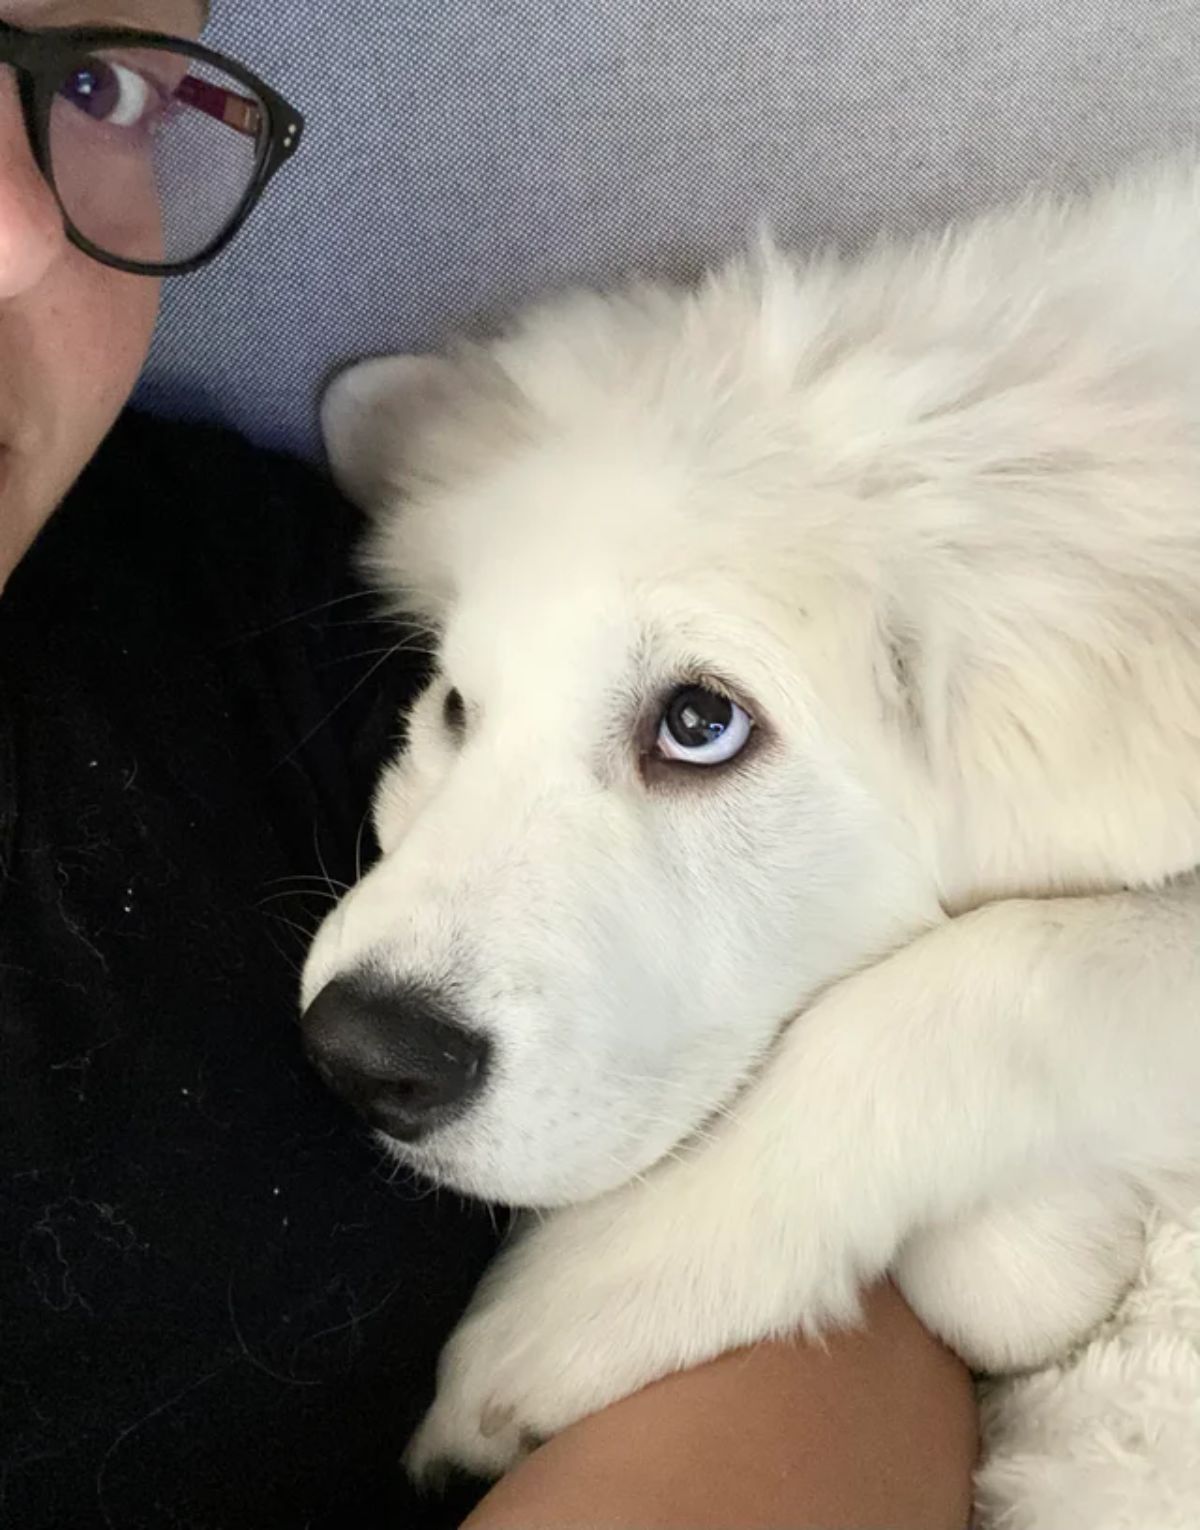 white great pyrenees cuddling with a man and looking up at him lovingly